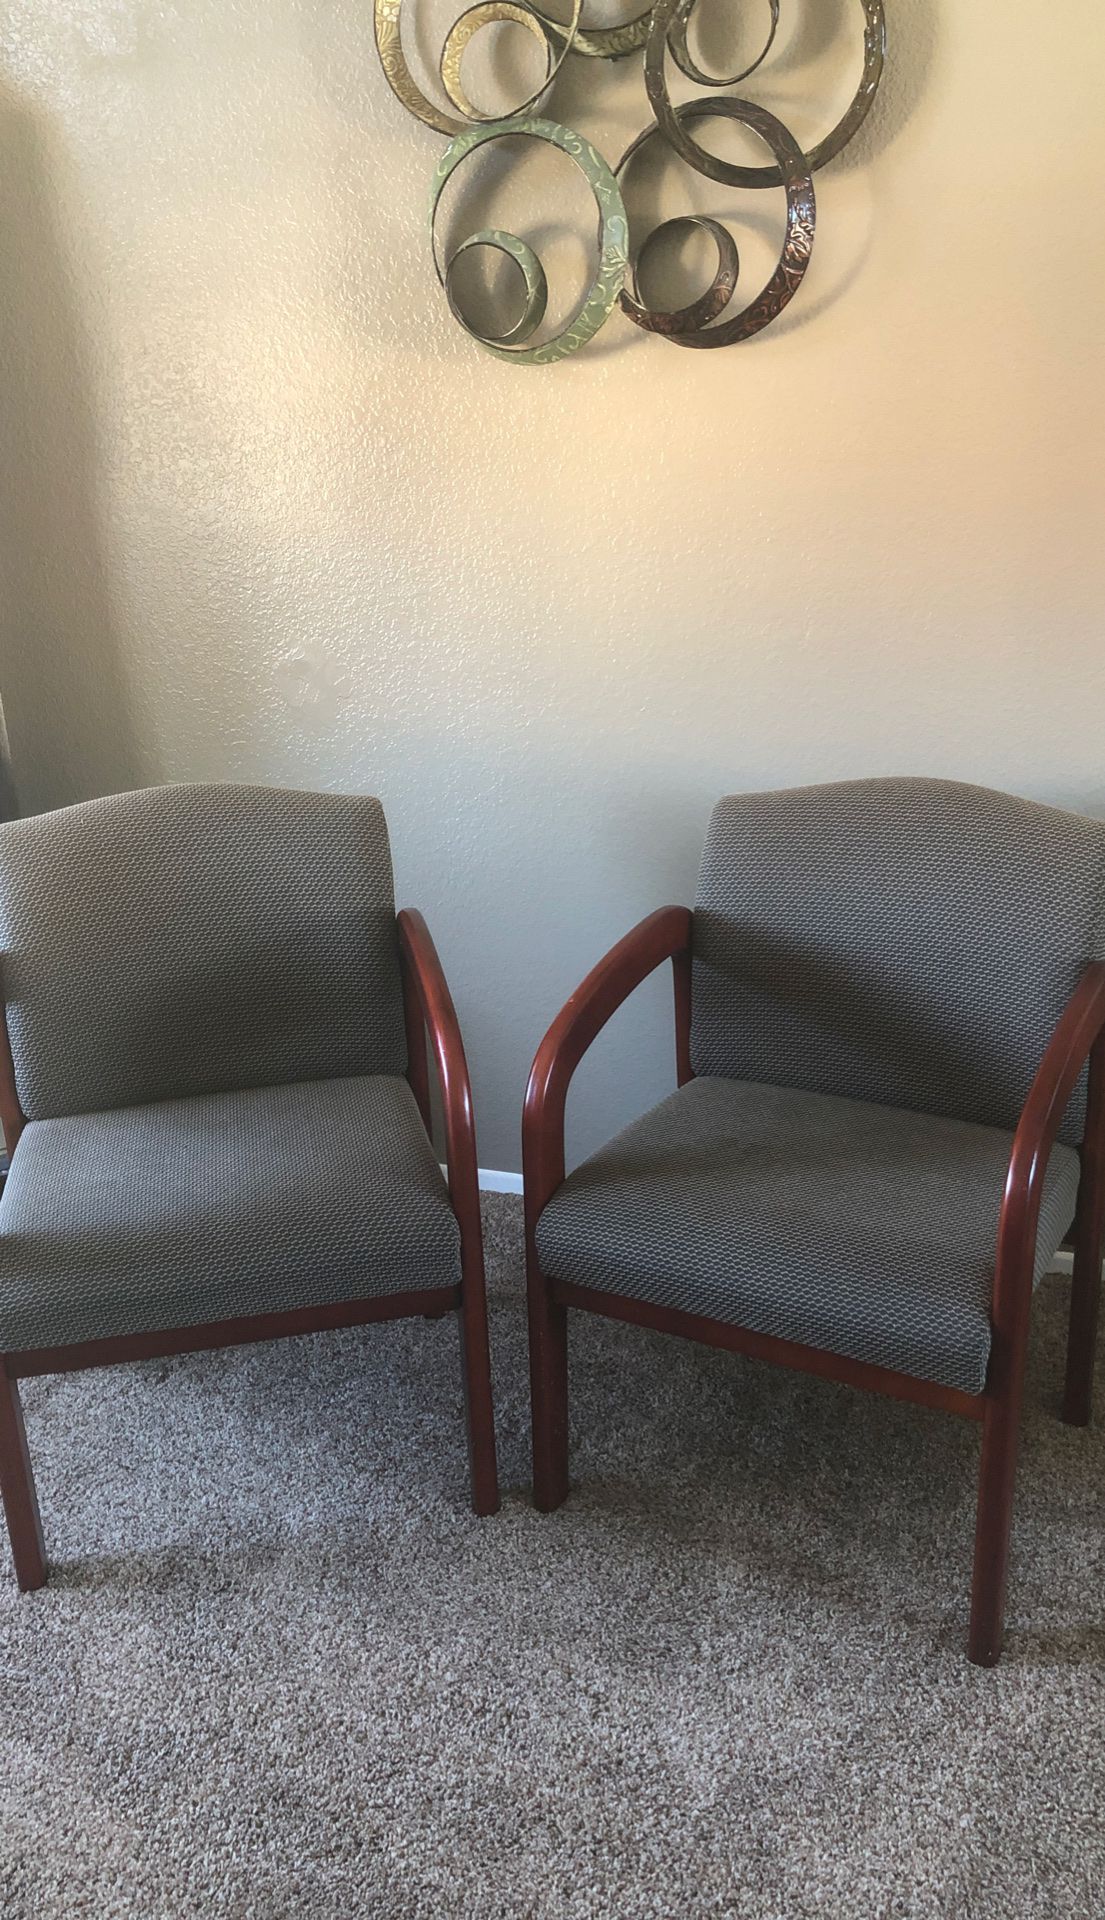 Nice office chairs 30.00 each